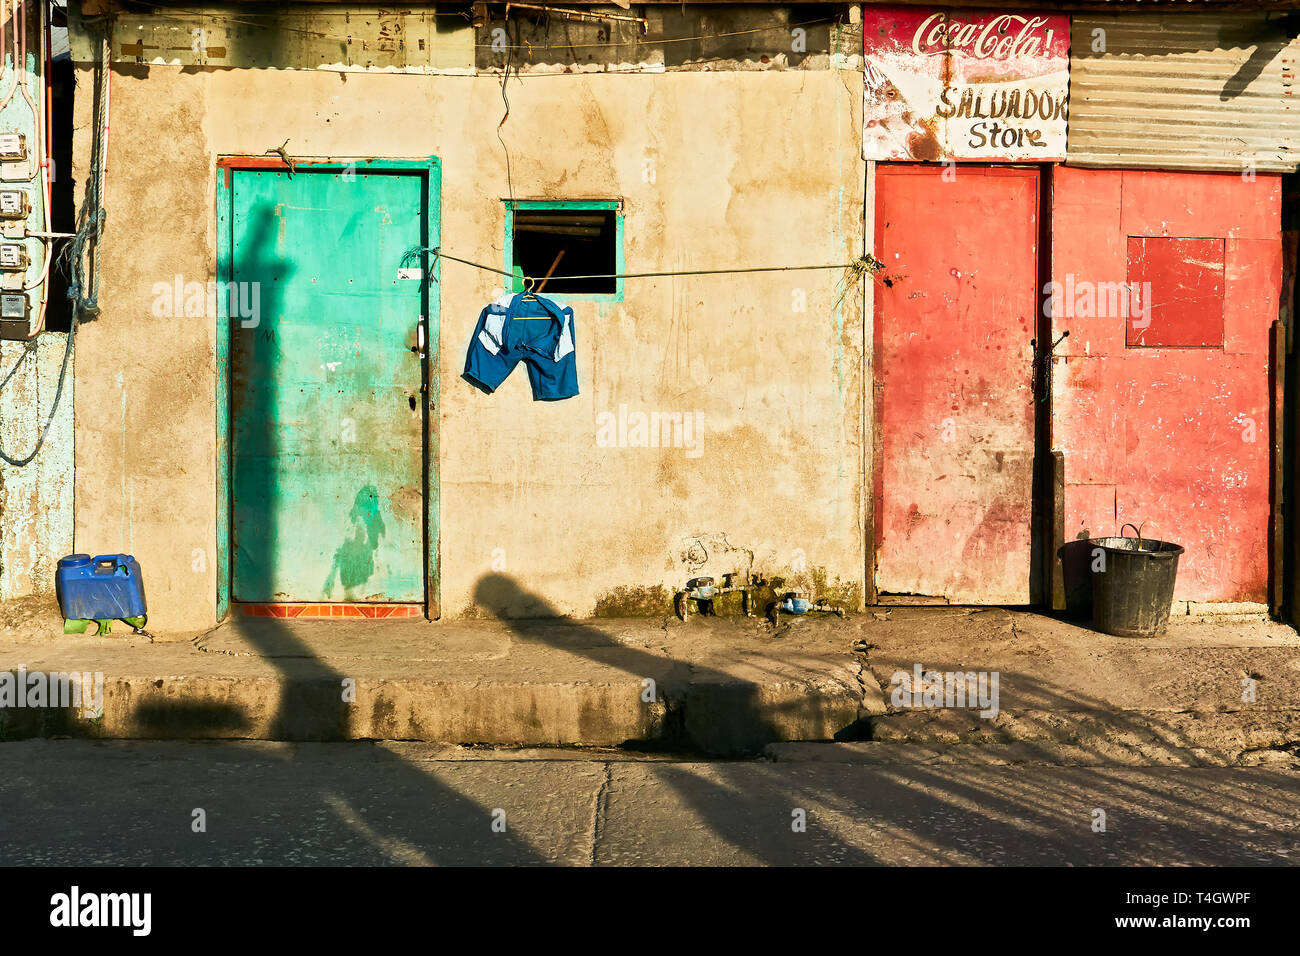 Romblon Town, Philippines - March 14, 2018: Poor building with colorful closed doors and laundry hanging on the line for drying at late afternoon Stock Photo